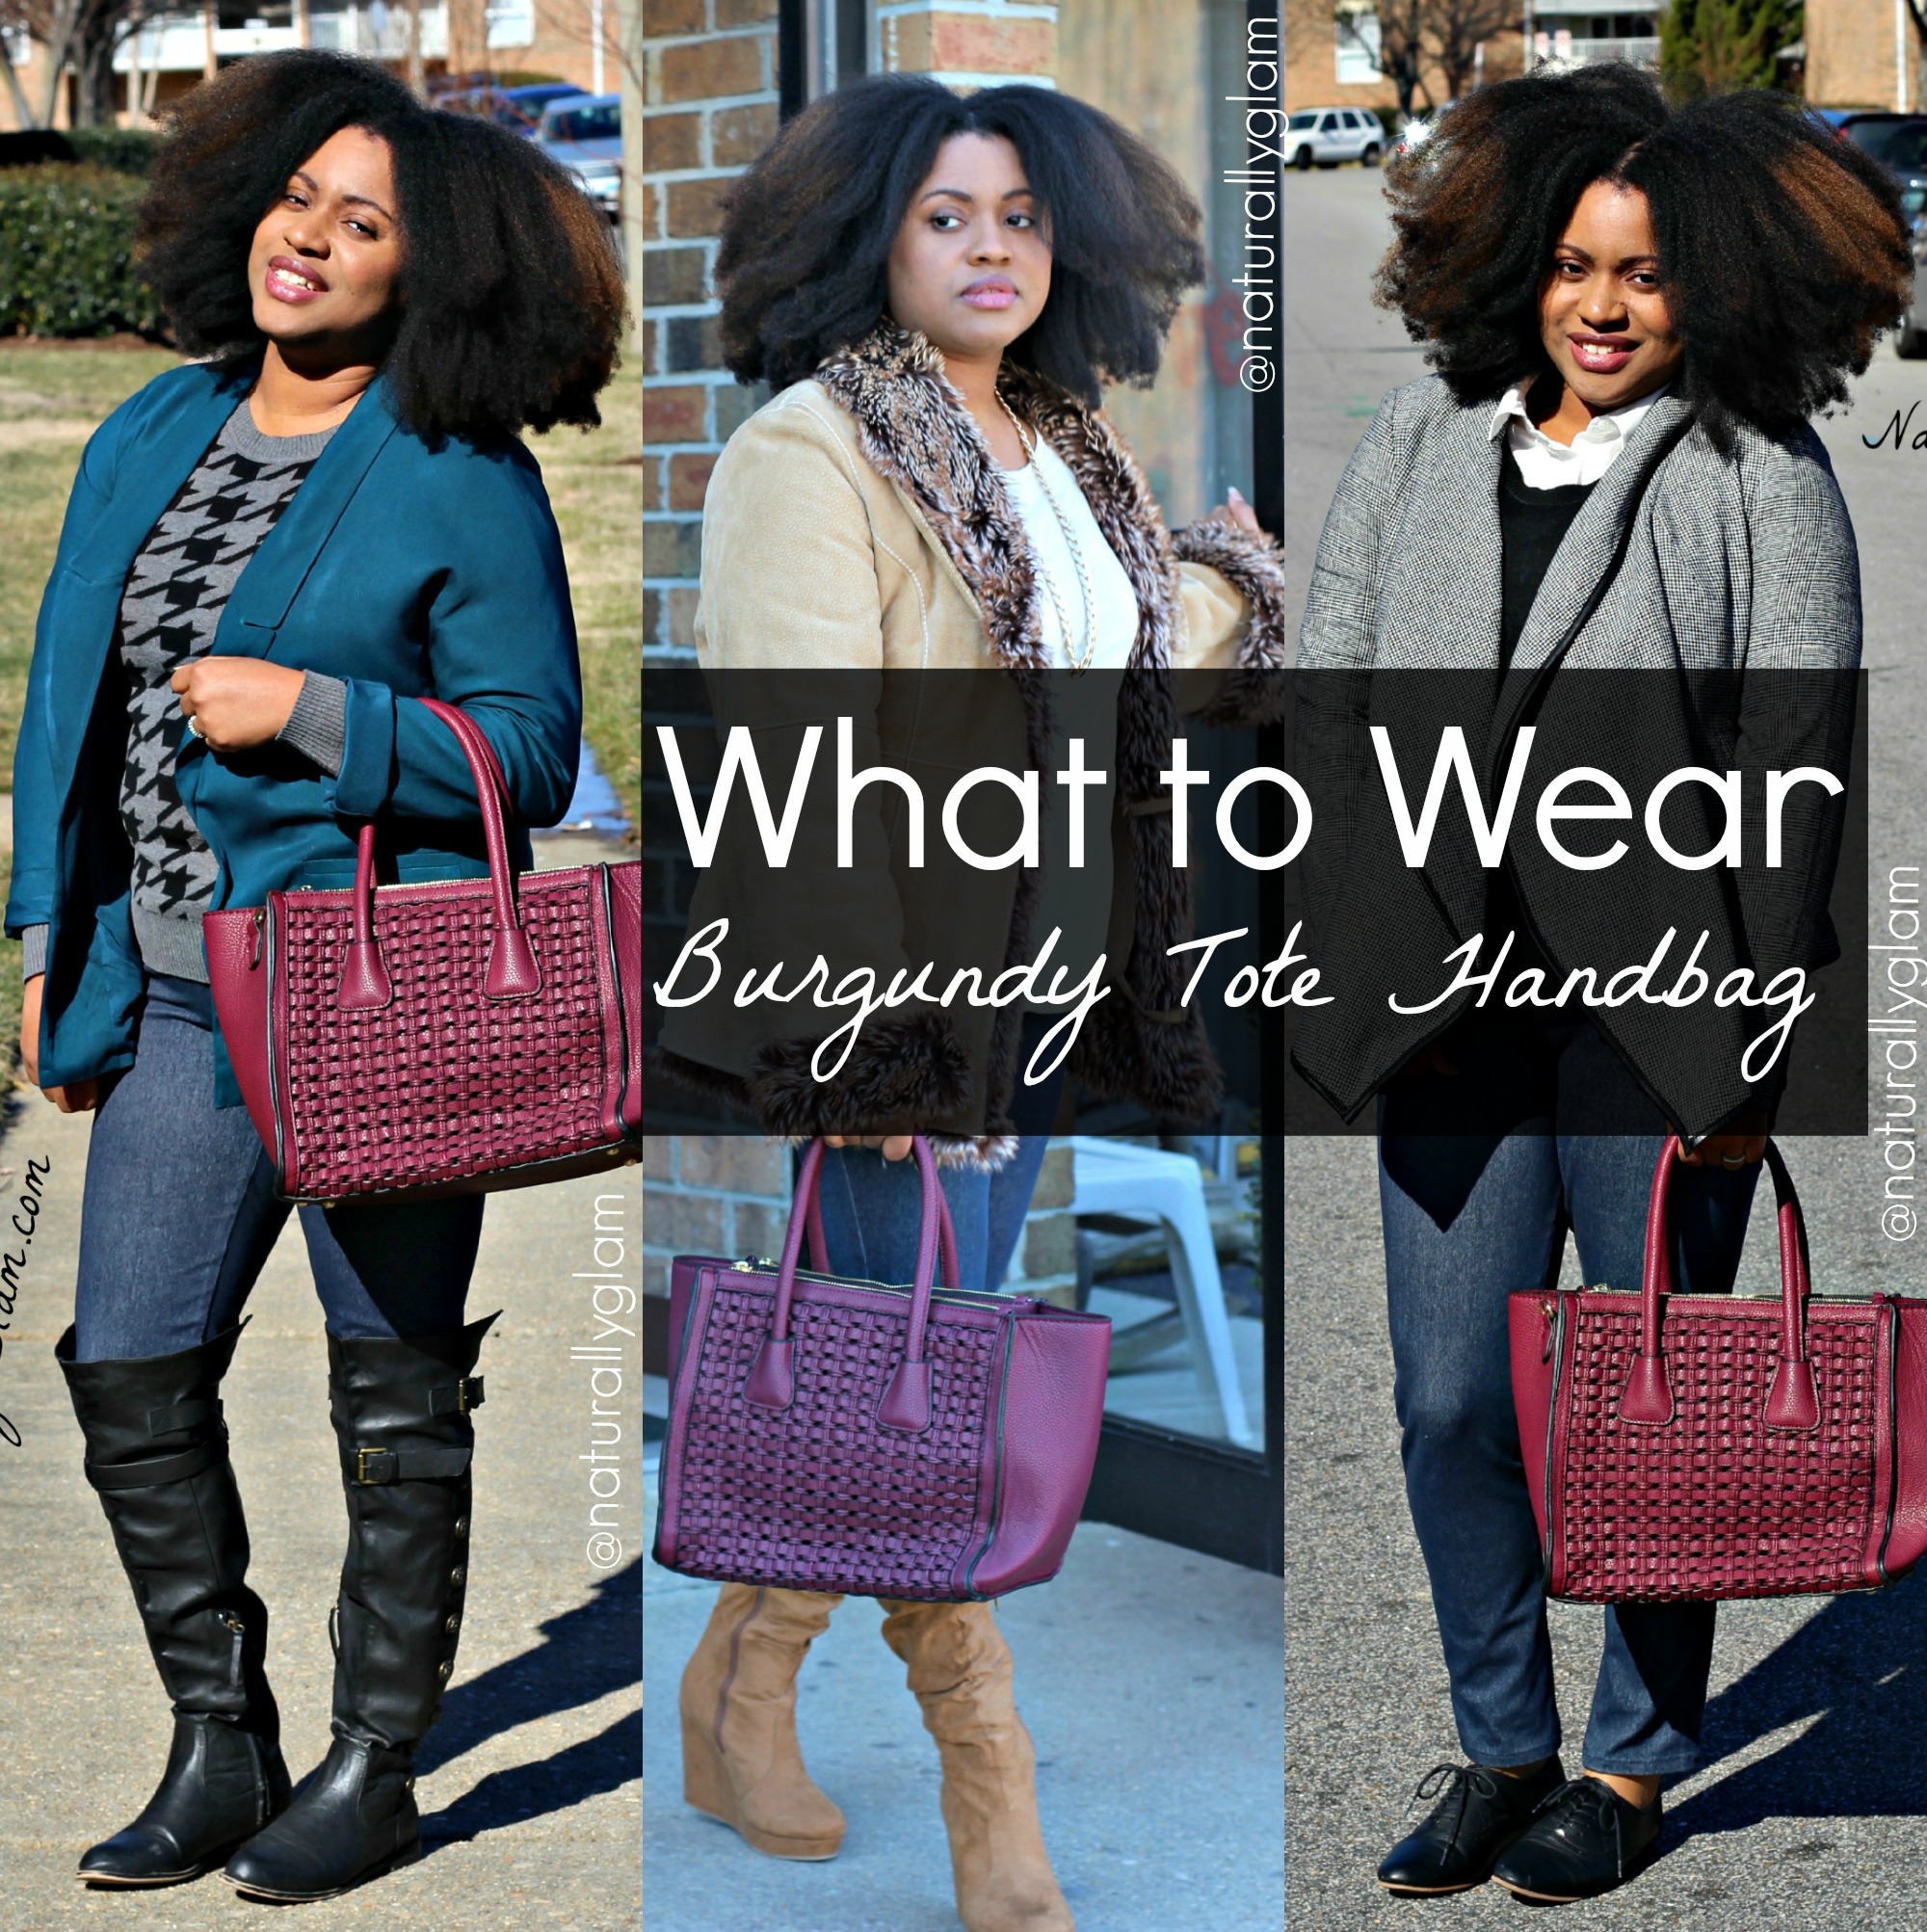 burgundy tote handbag, black women wearing different outfits, clothing and fashion